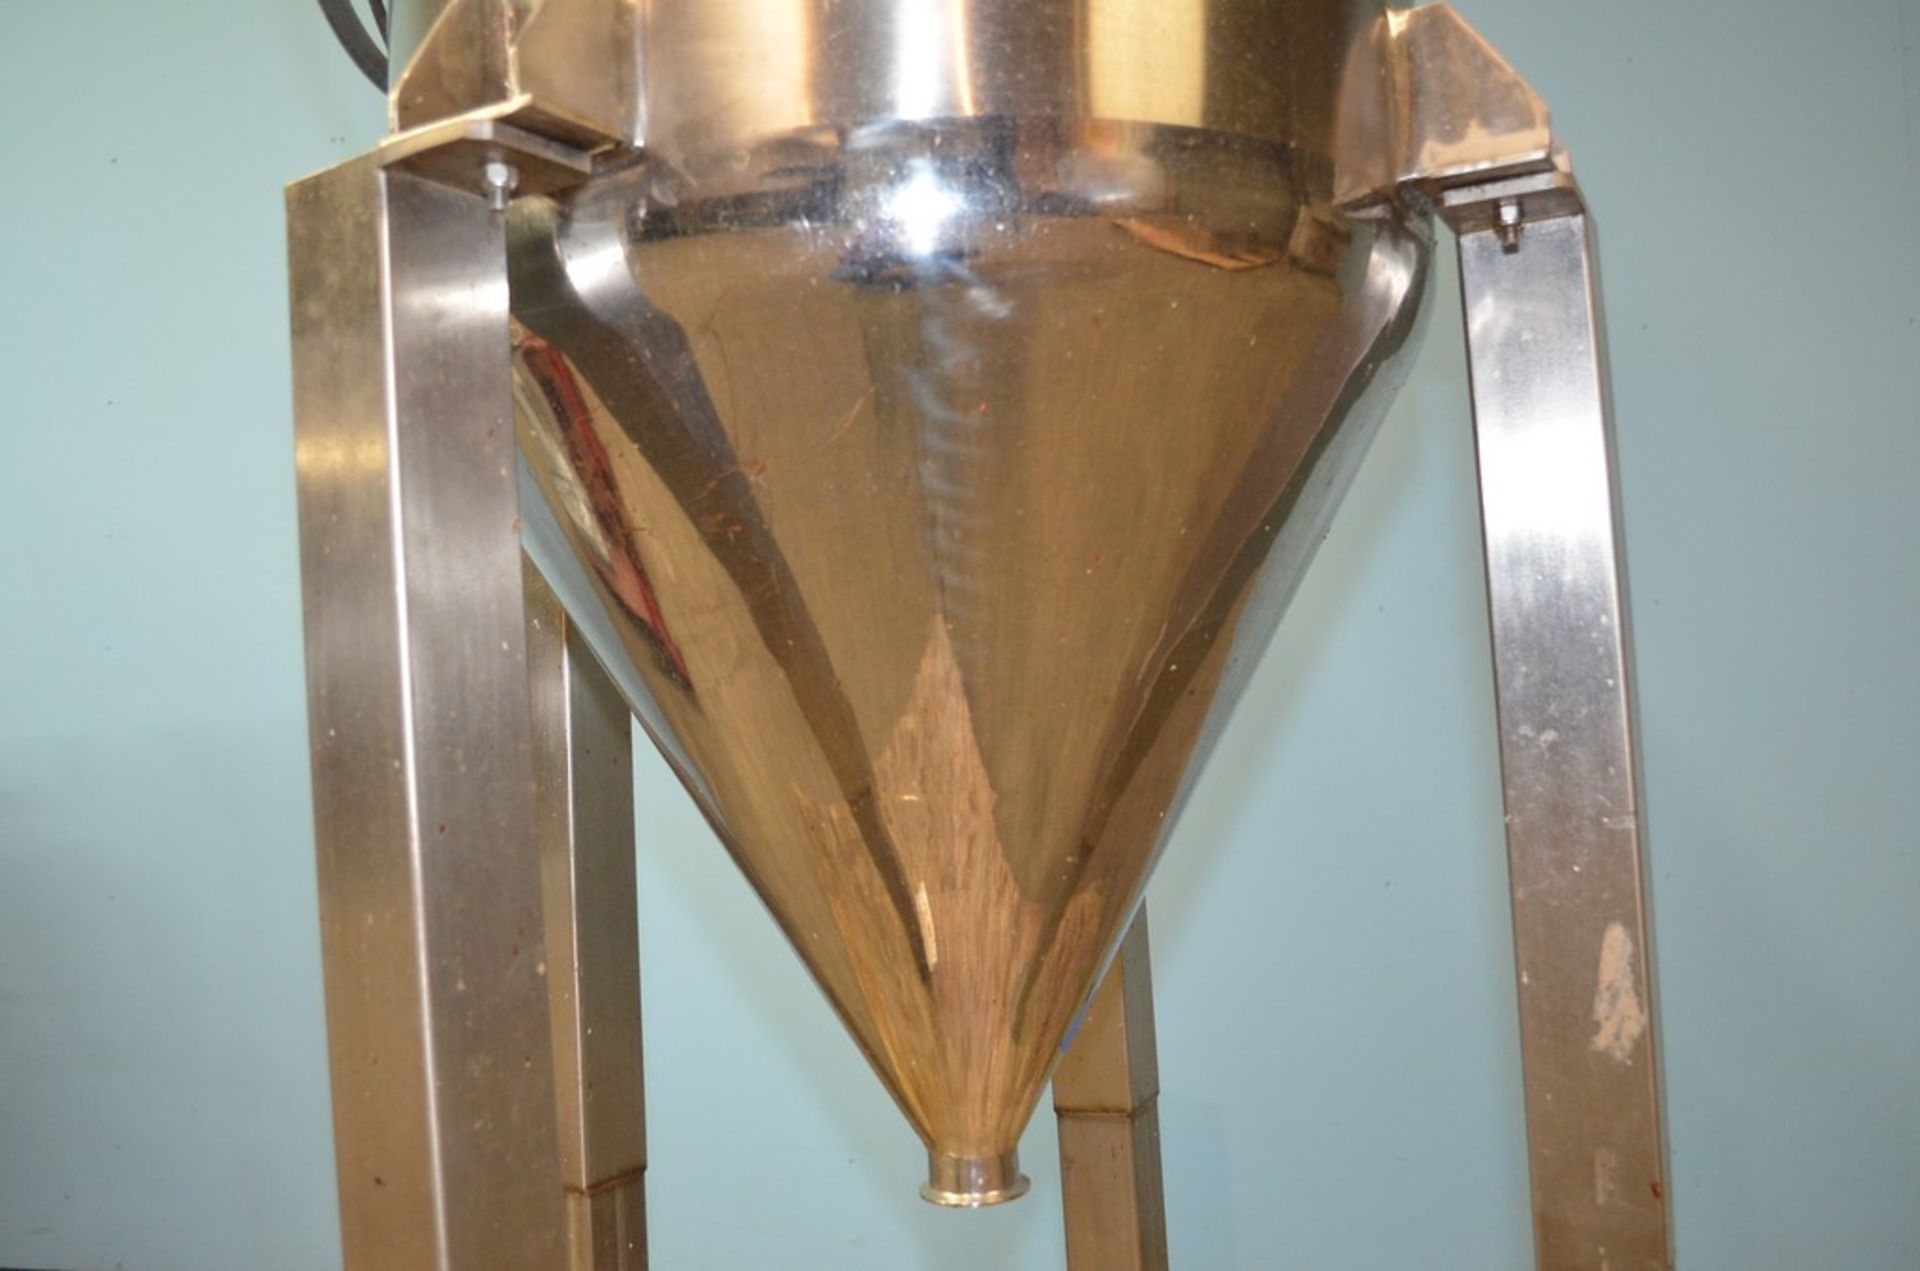 Approx 50 Gallon S/S Agitated Pressure Kettle. Top Entering Vertical Sigma-Style Agitator. - Image 8 of 13